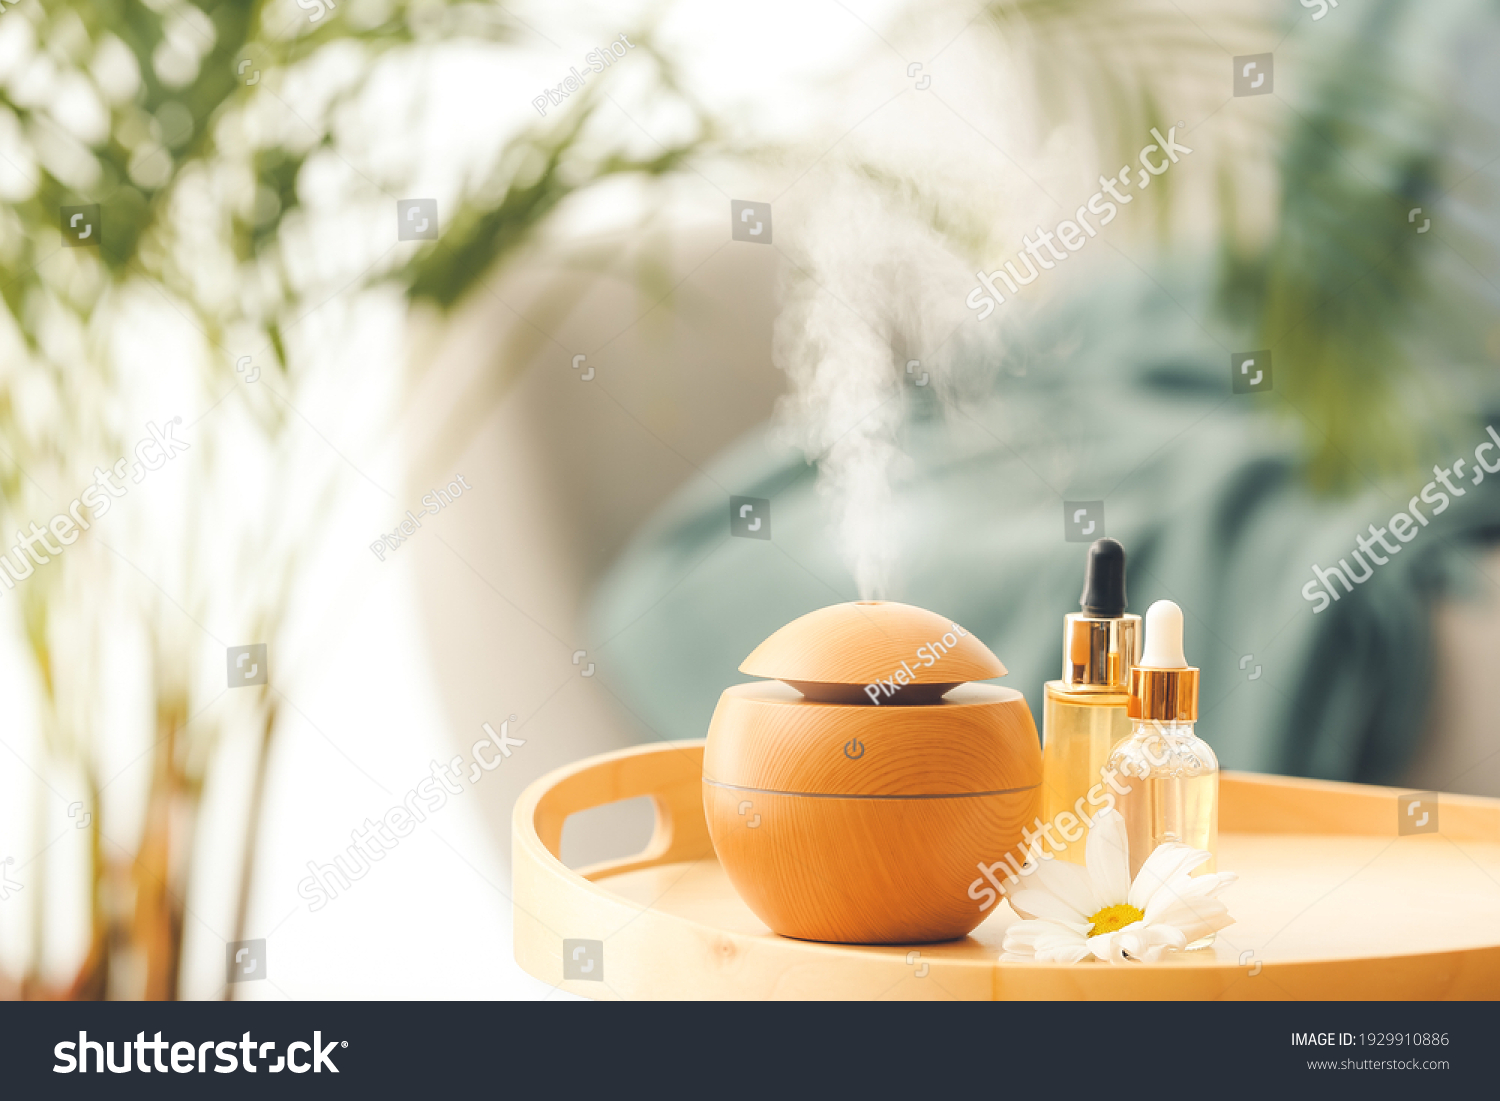 Aroma oil diffuser on table in room #1929910886